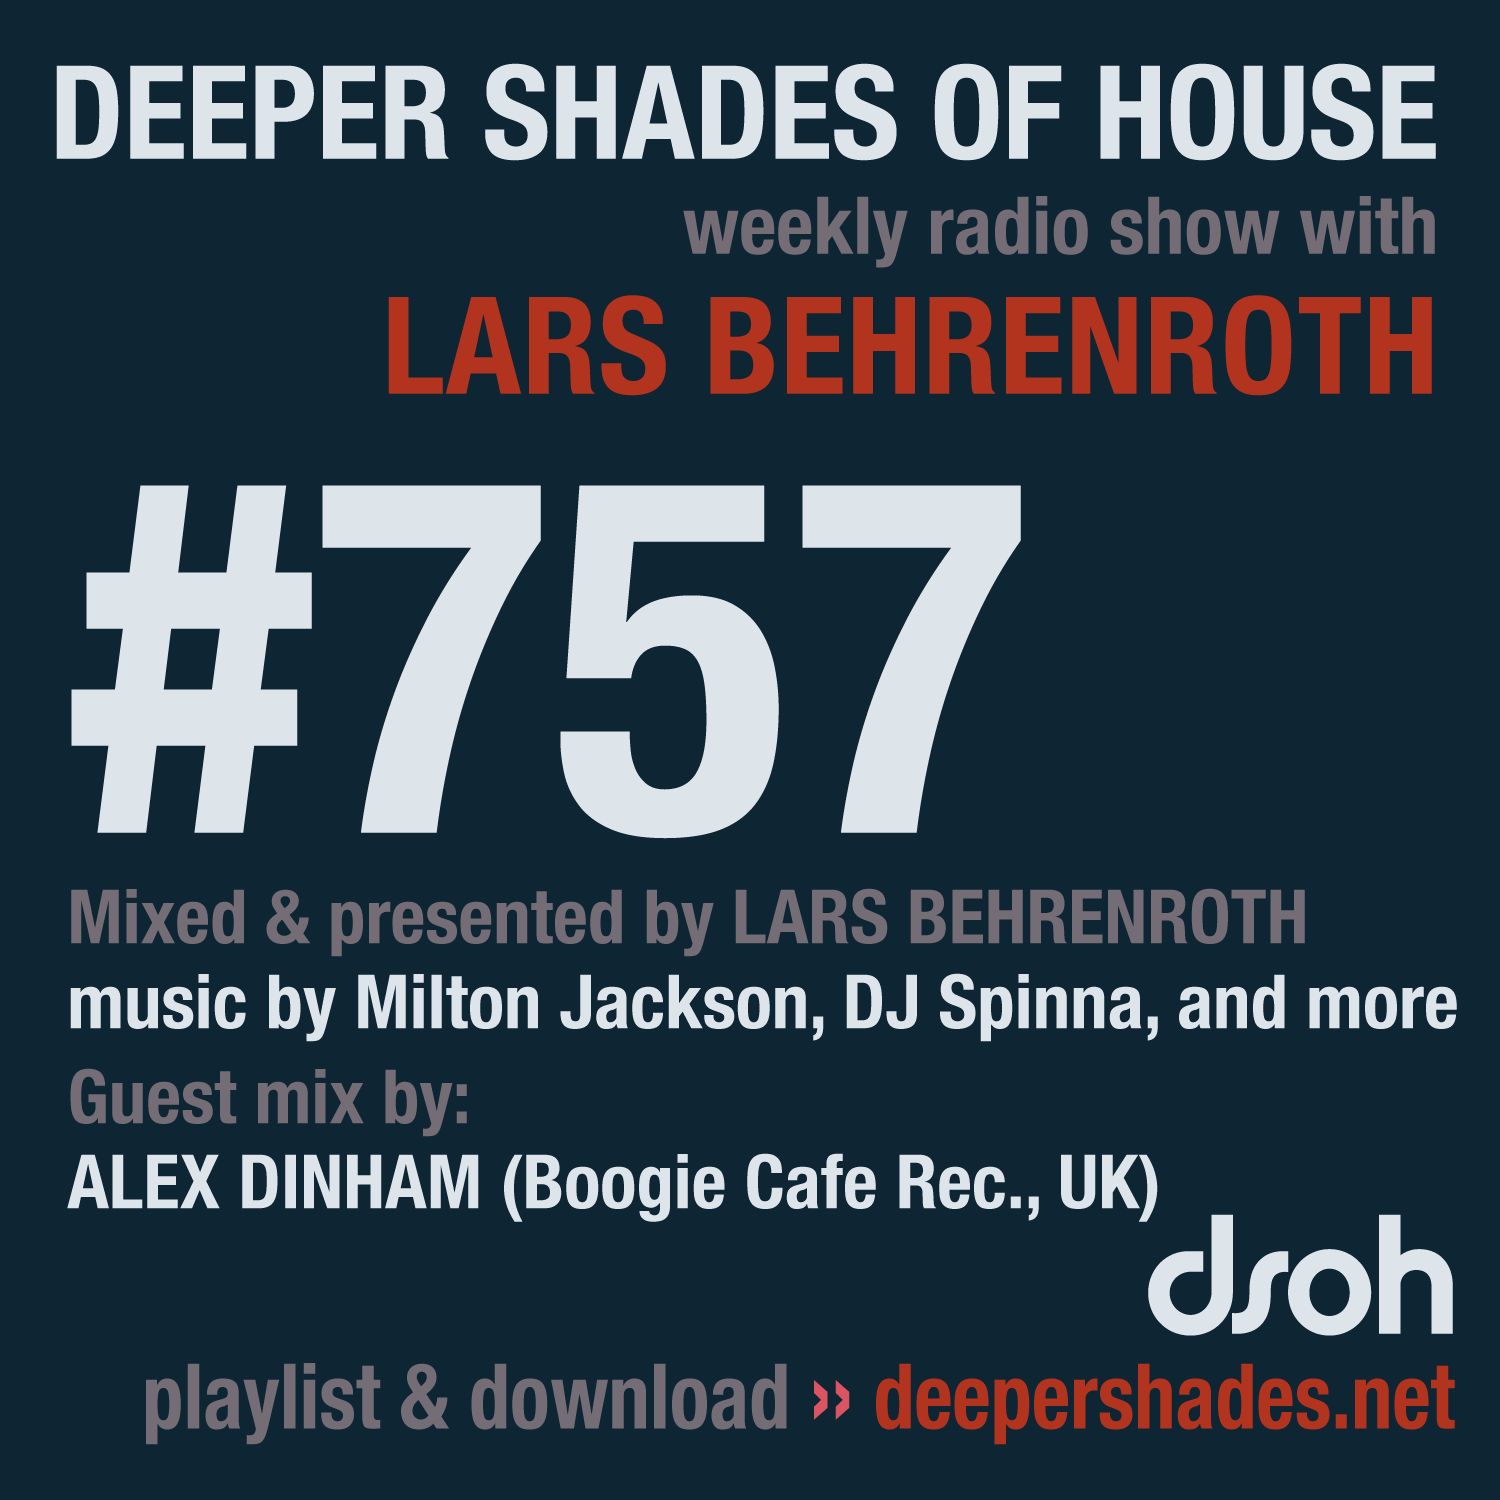 DSOH #757 Deeper Shades Of House w/ guest mix by ALEX DINHAM